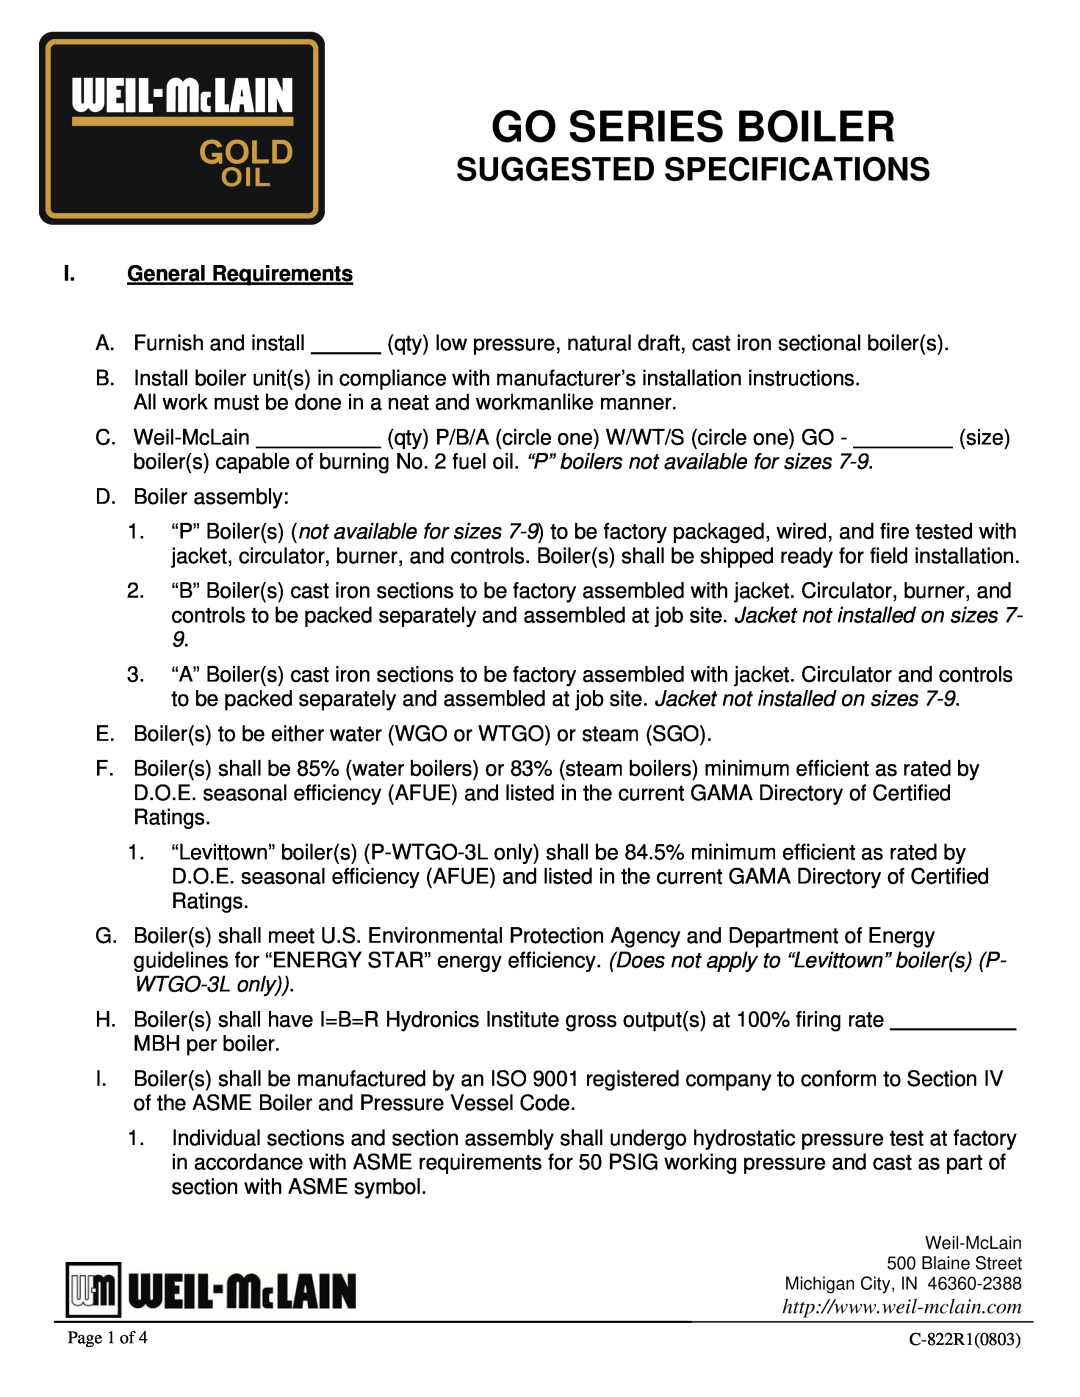 Weil-McLain P-SGO specifications I.General Requirements, Go Series Boiler, Suggested Specifications 